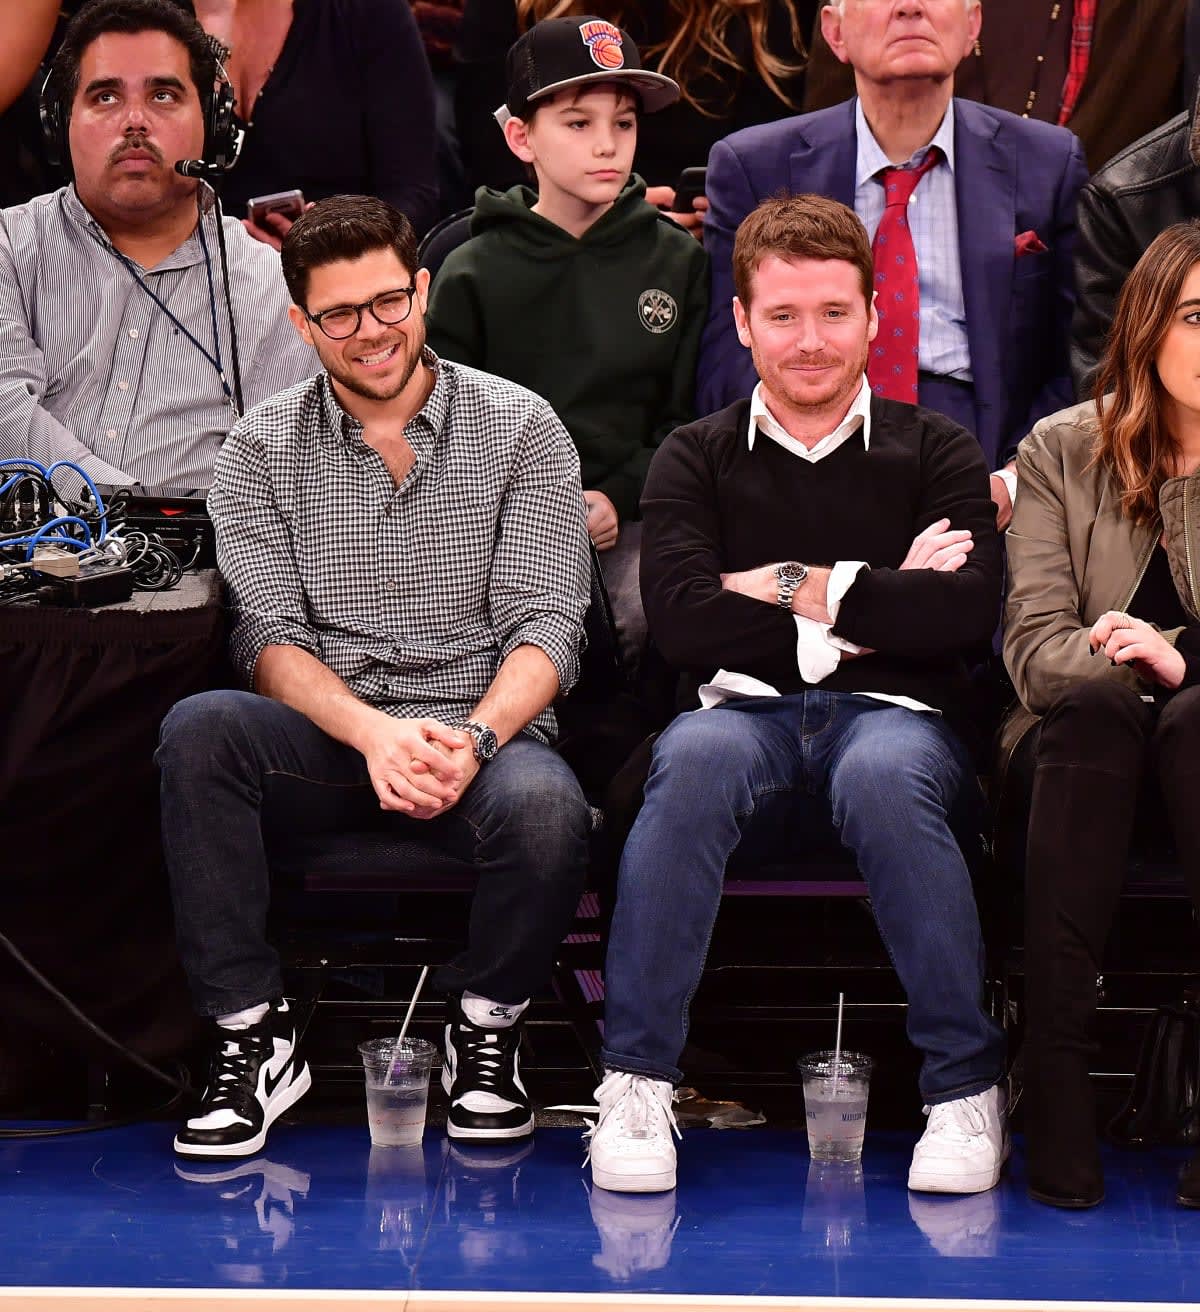 Jerry Ferrara and Kevin Connolly attend Washington Wizards Vs. New York Knicks game. Photo by James Devaney | GC Images